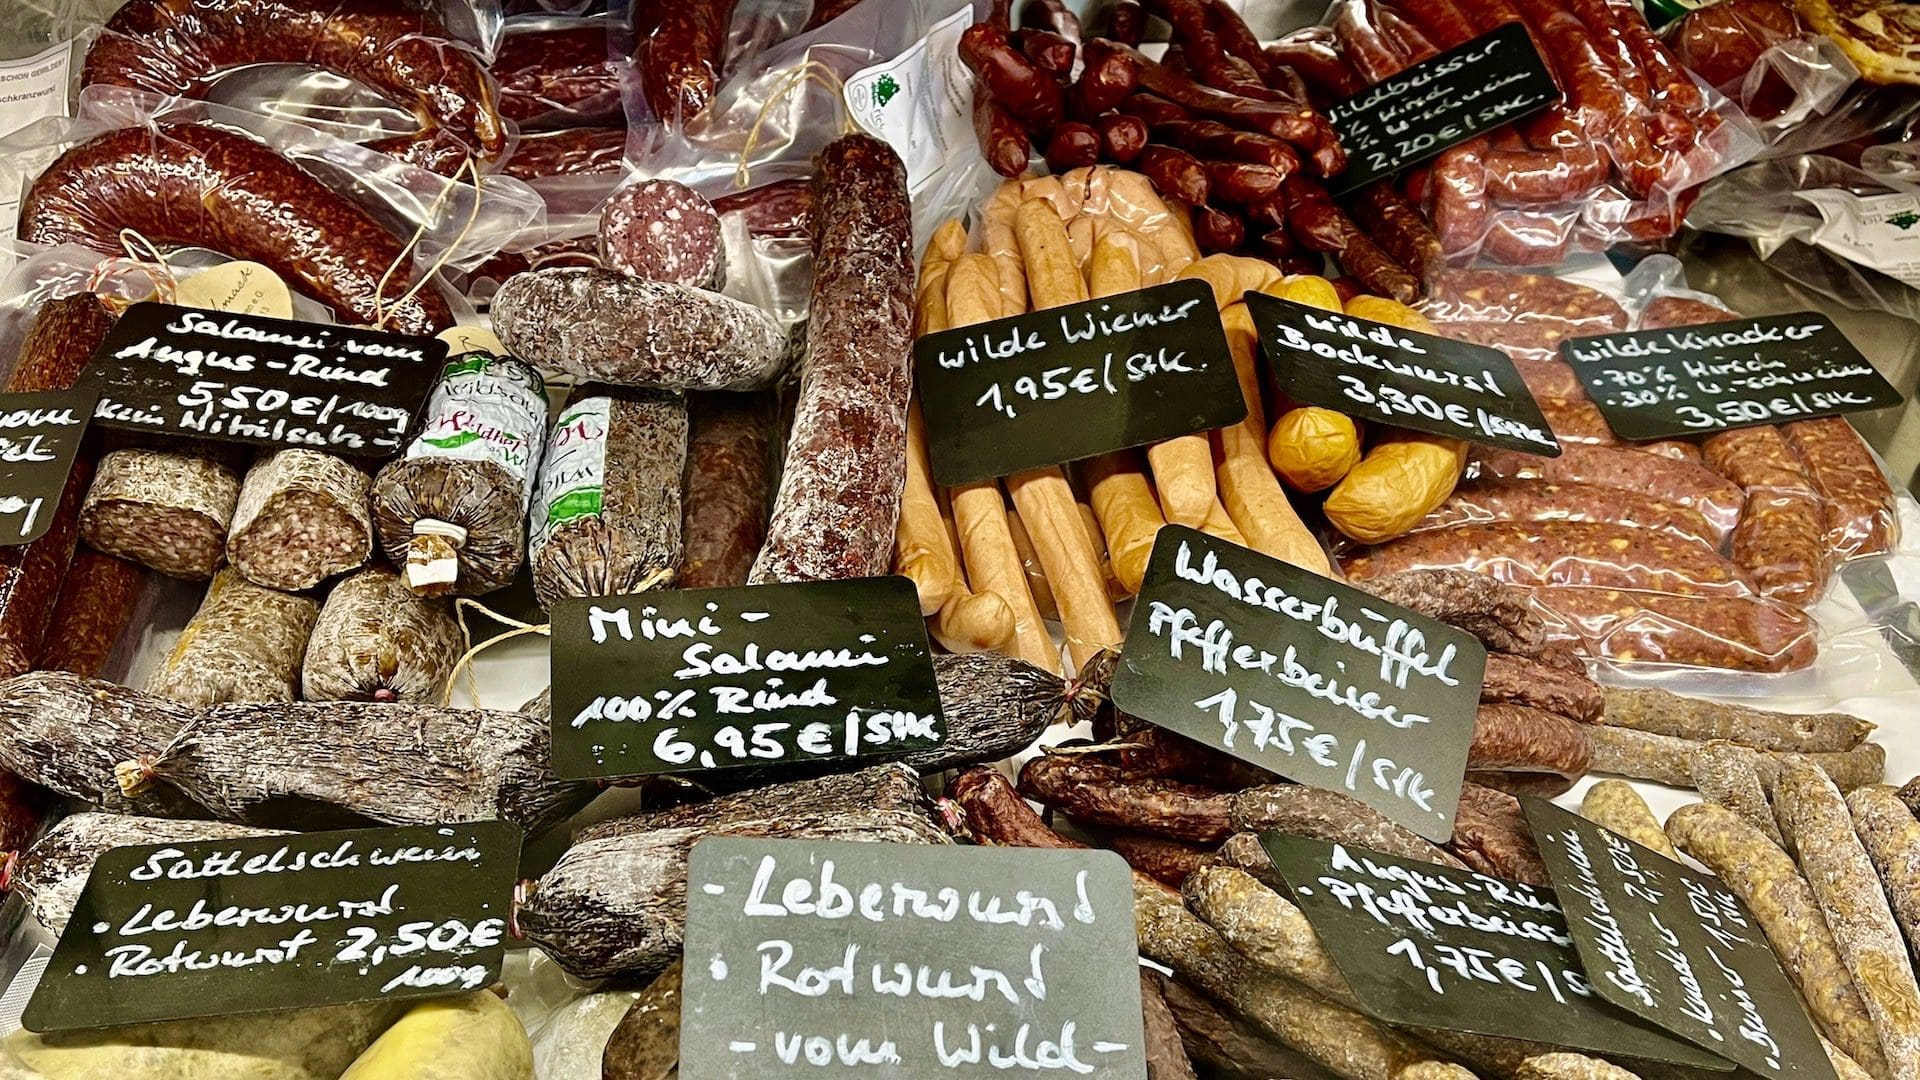 Regional specialty charcuterie from one stop on Walk With Us Tours Gourmet Food Tour in East Berlin Prenzlauer Germany